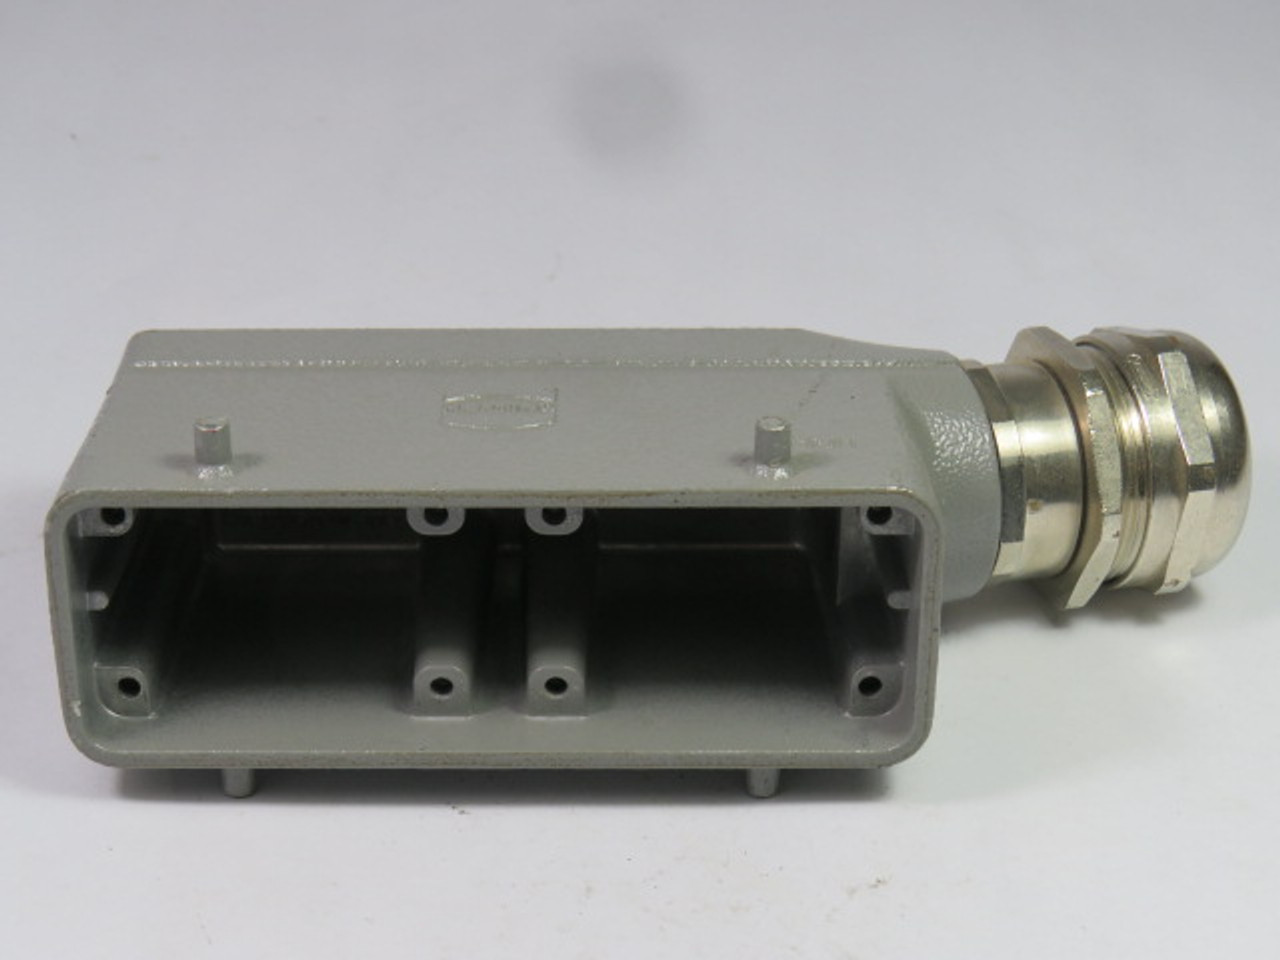 Harting 19-30-024-1522 Side Entry Connector Hood USED